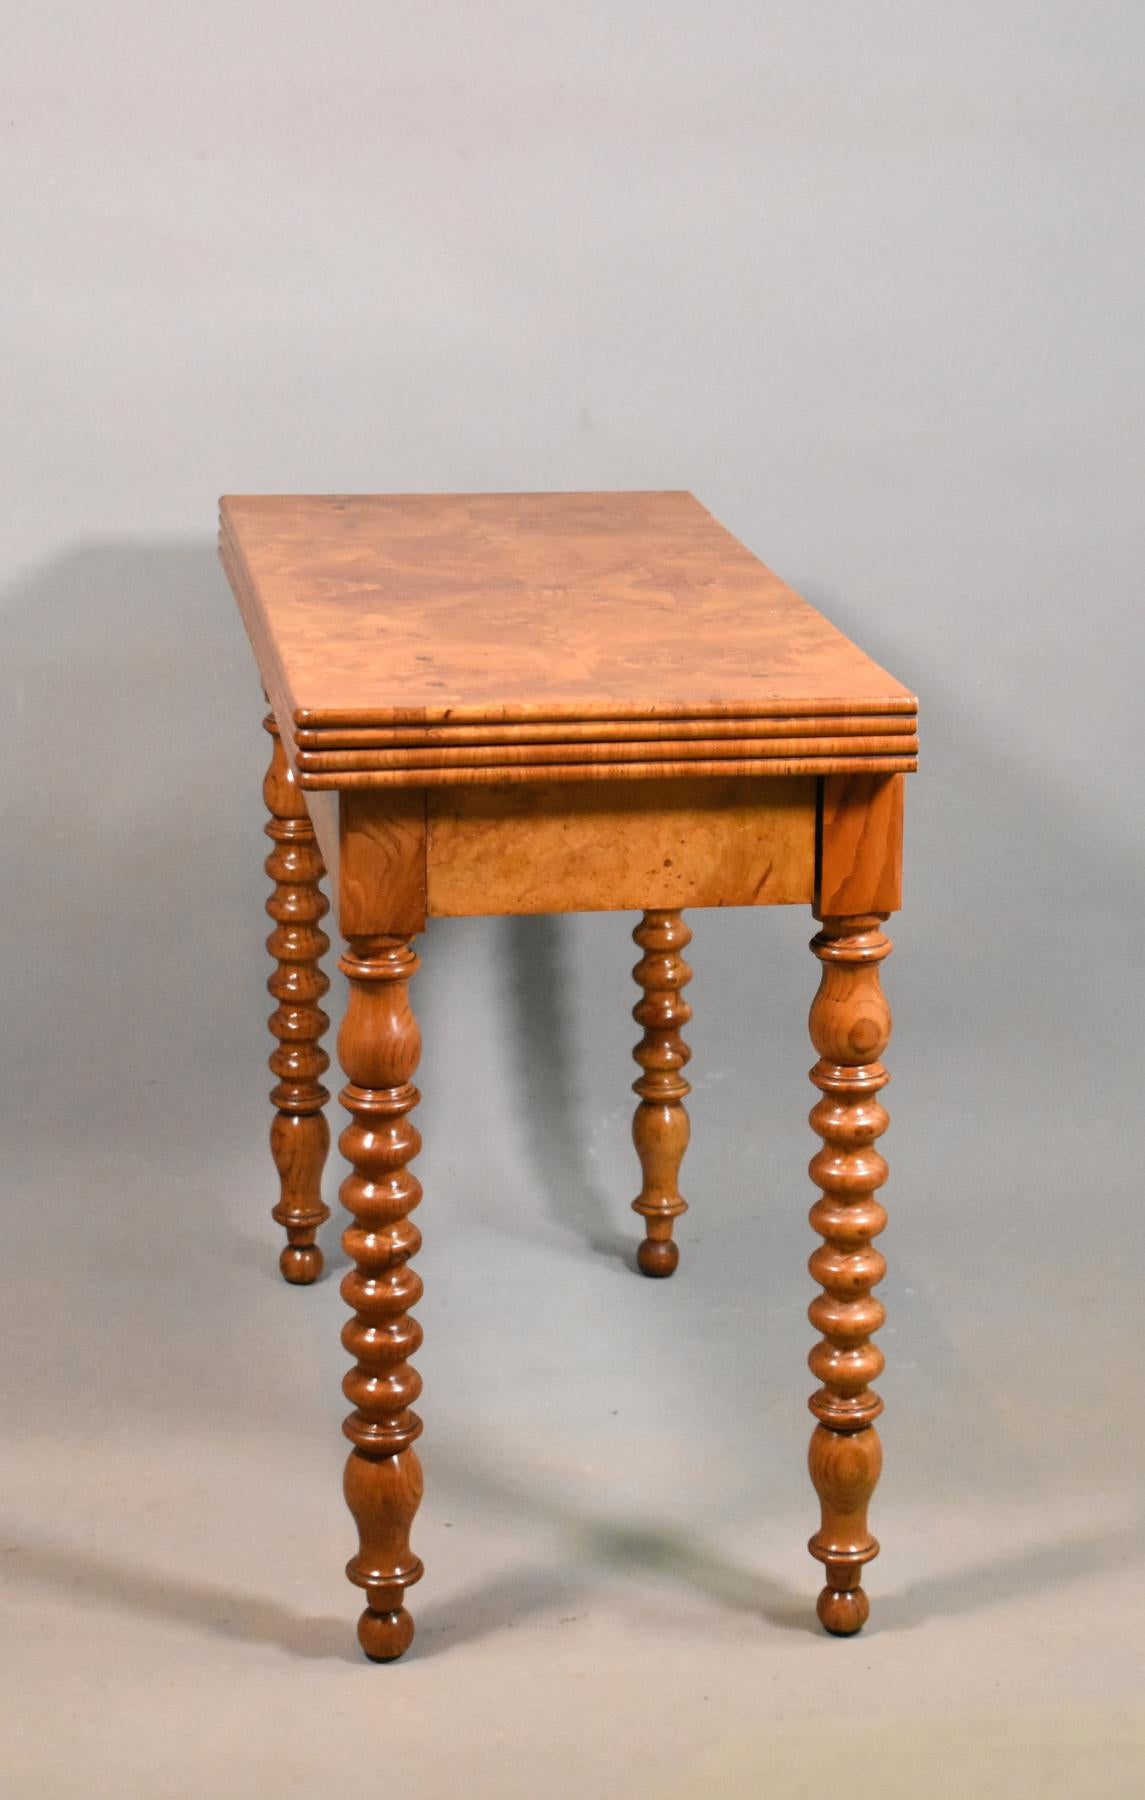 Molded Antique French Burr Elm Folding Games Table, 19th Century